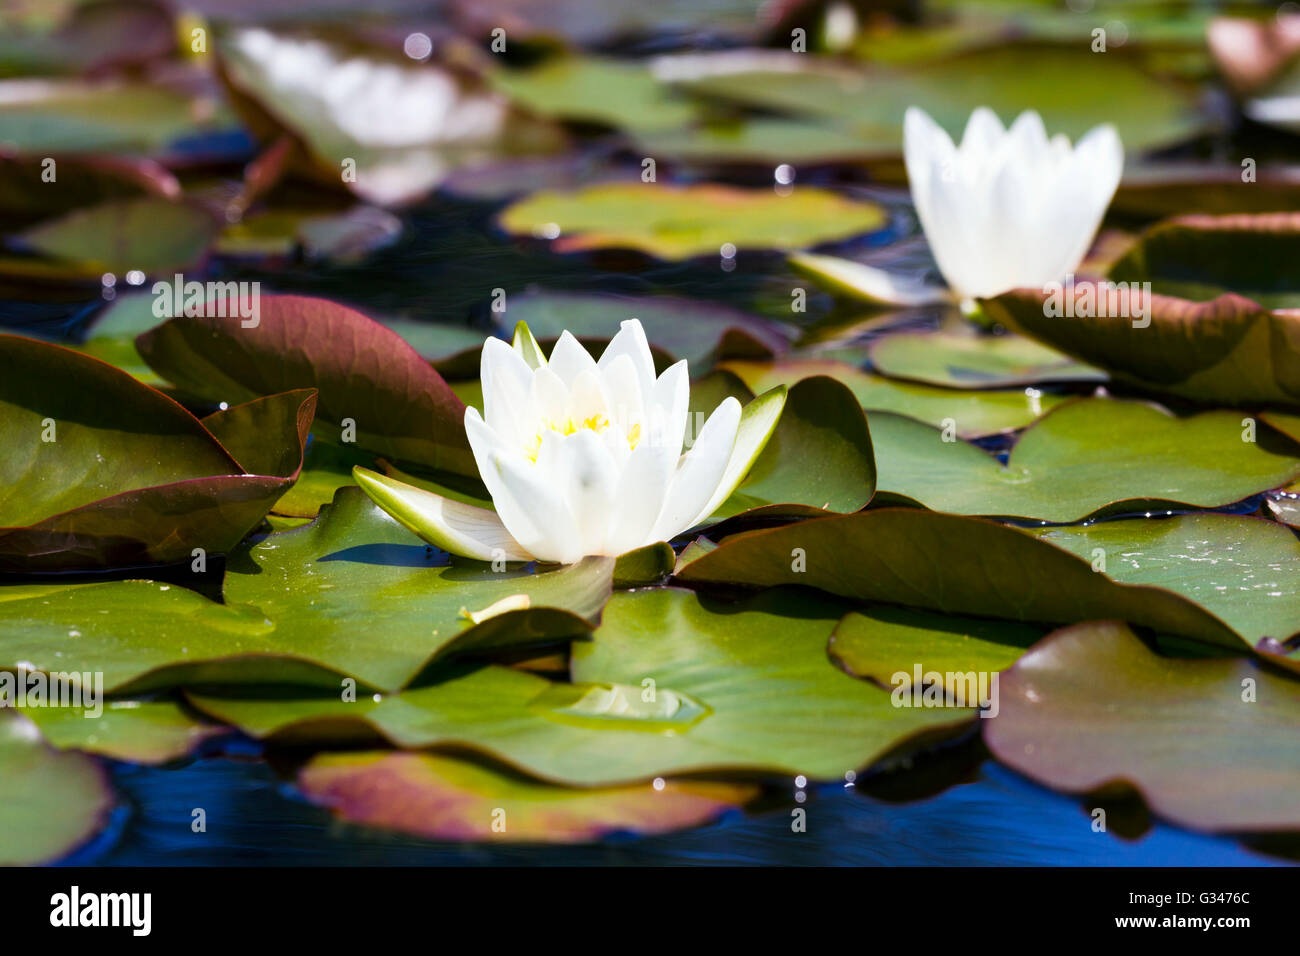 Waterlilies floating on a garden pond Stock Photo